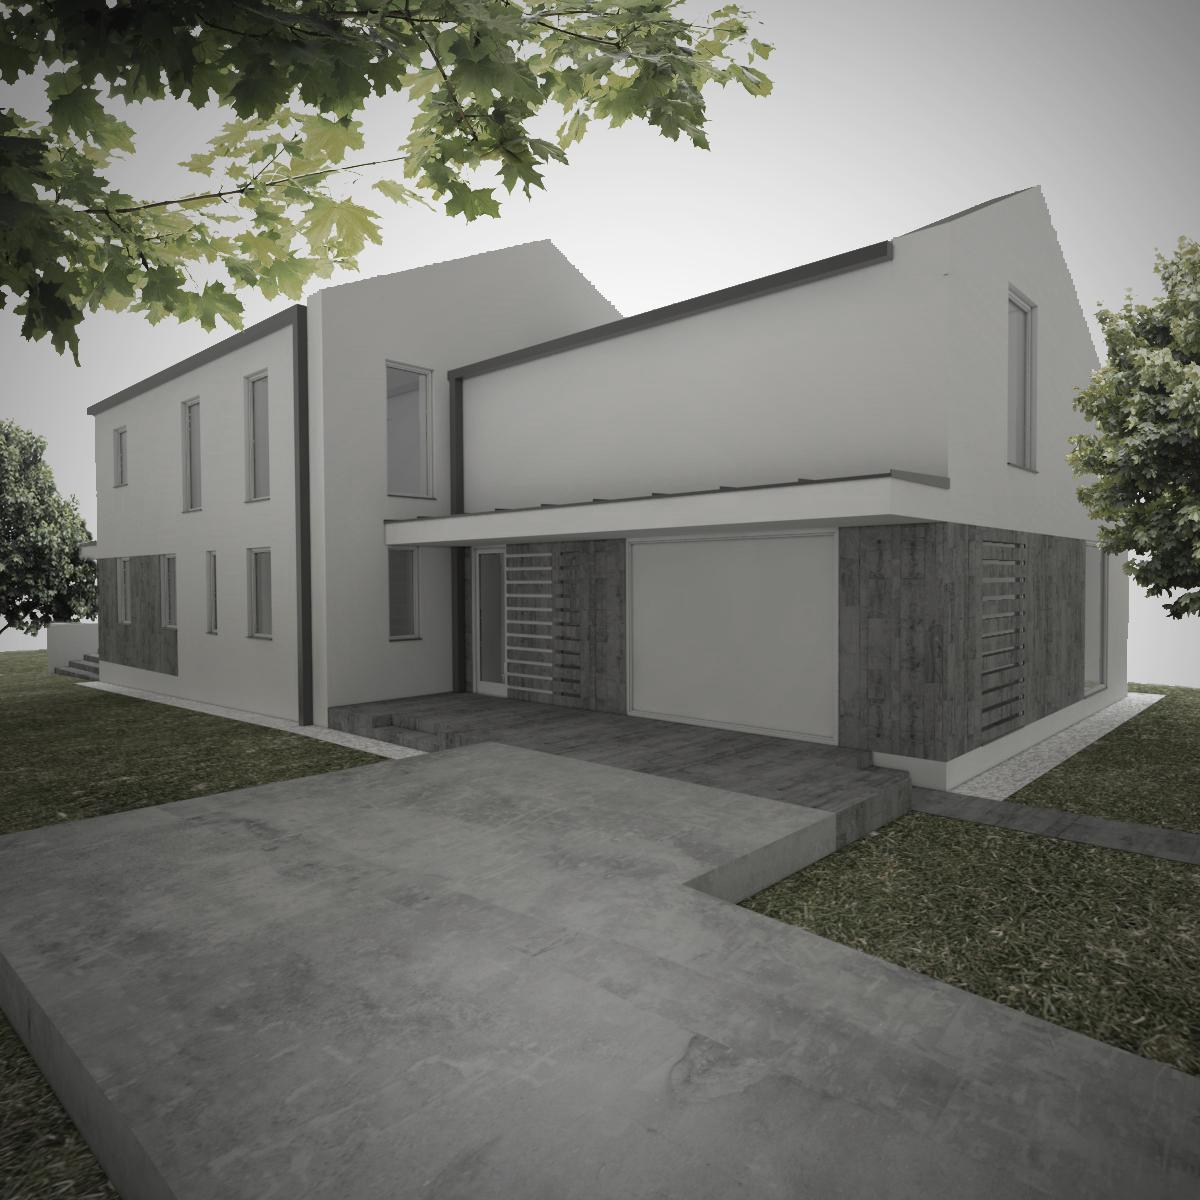 01_Ringlo house